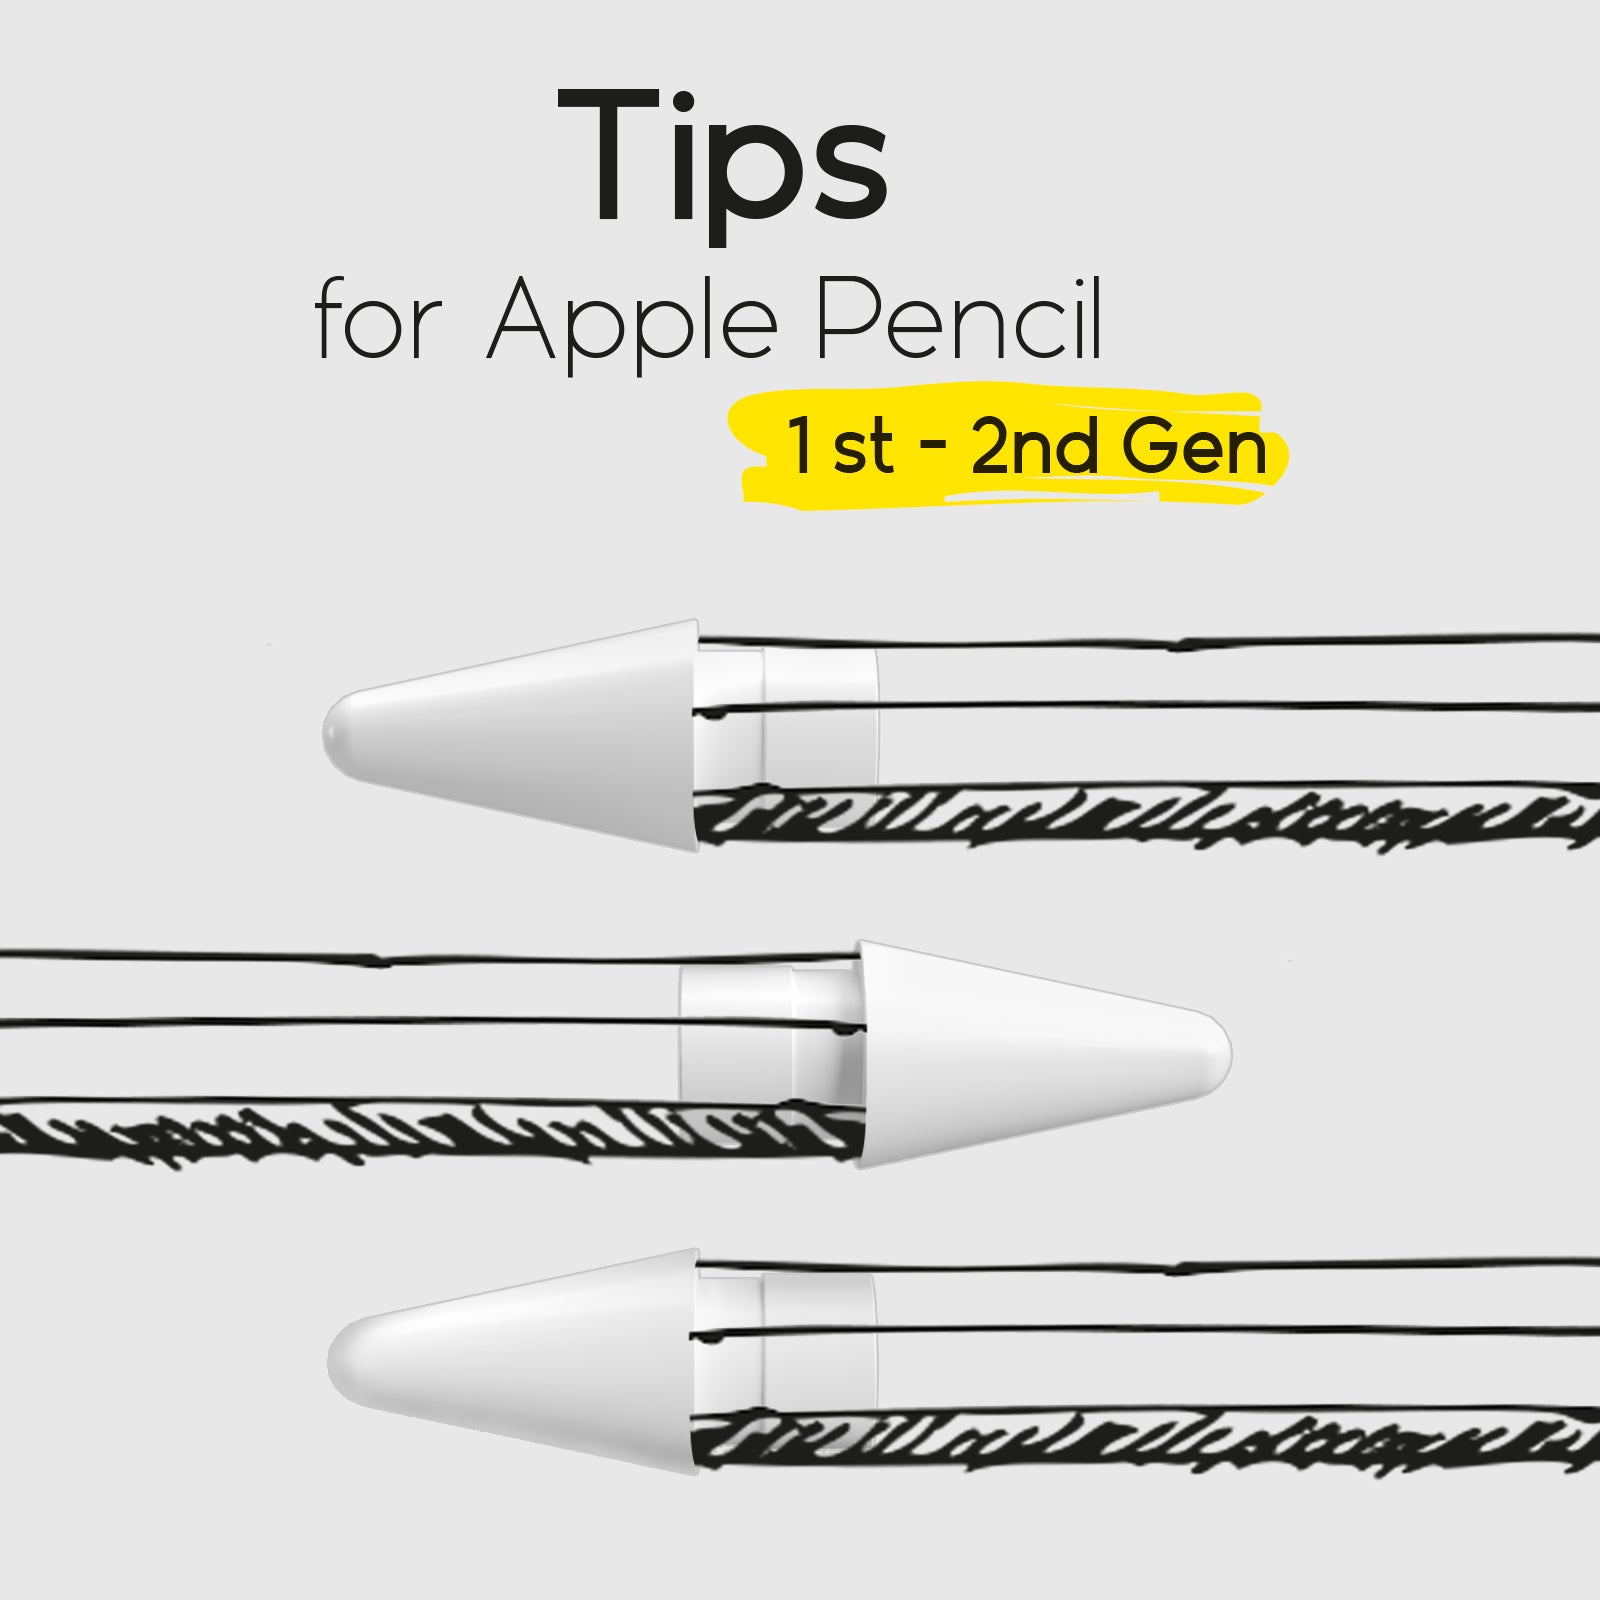 Replacement tips for 1st and 2nd generation Apple Pencils